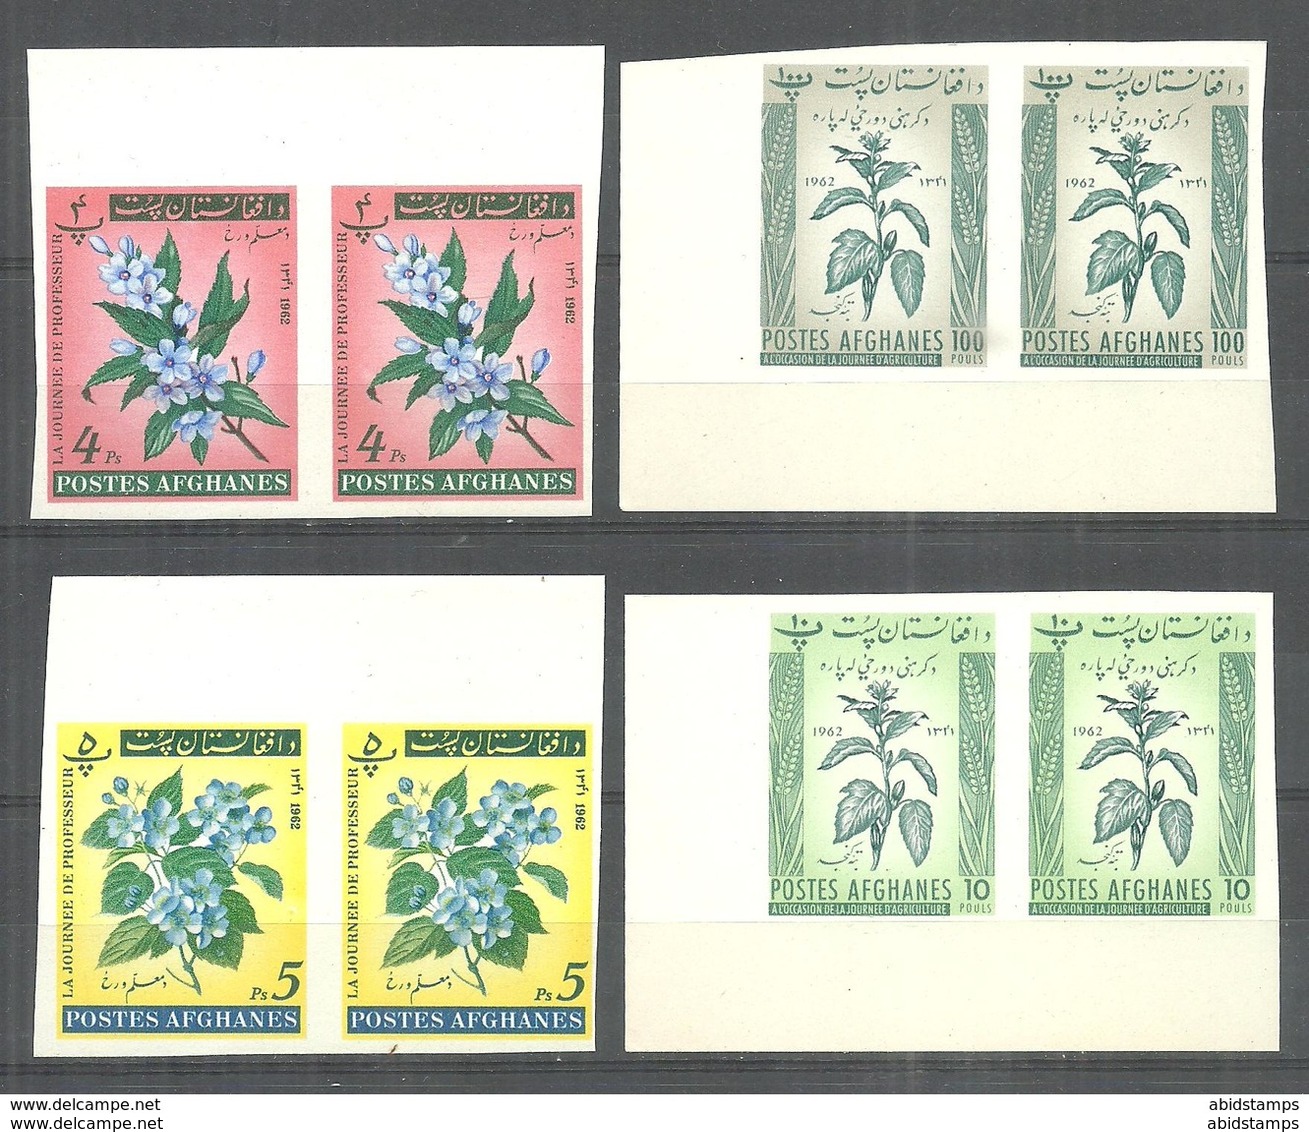 AFGHANISTAN STAMPS  1962 FLOWERS IMPERF PAIR MNH - Afghanistan